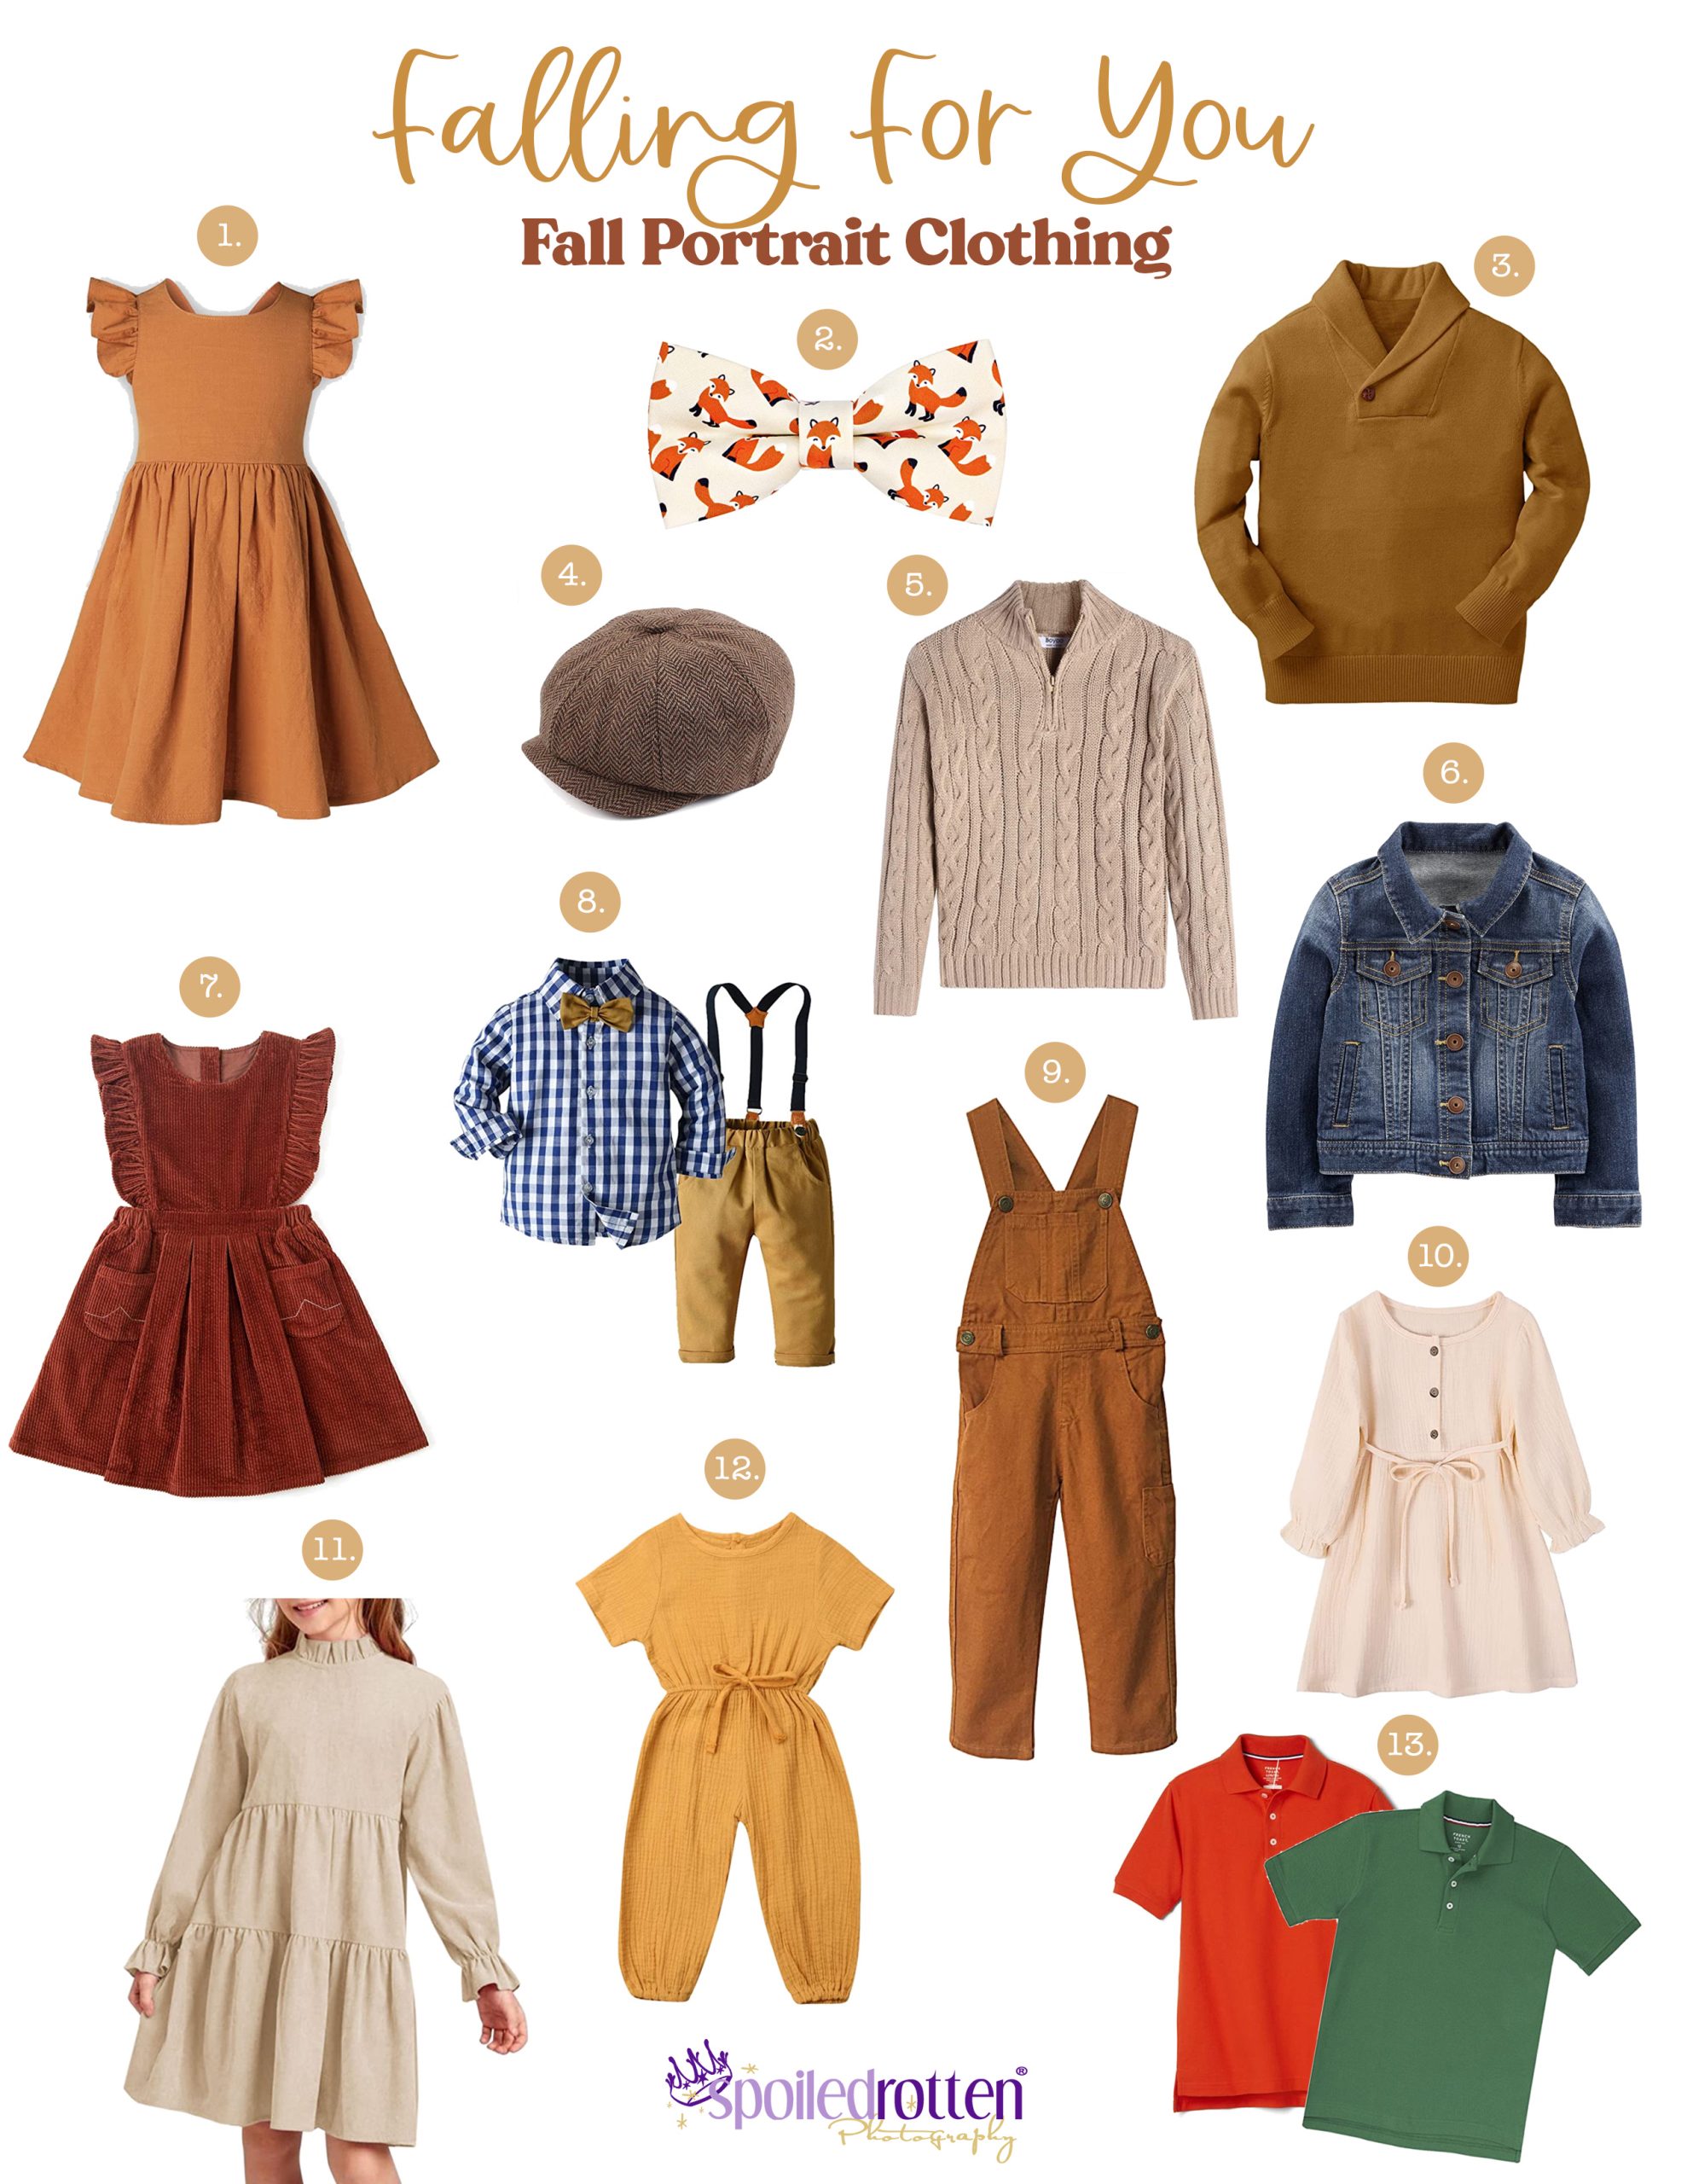 6 Stylish and Affordable Fall Outfit Ideas - Affordable by Amanda